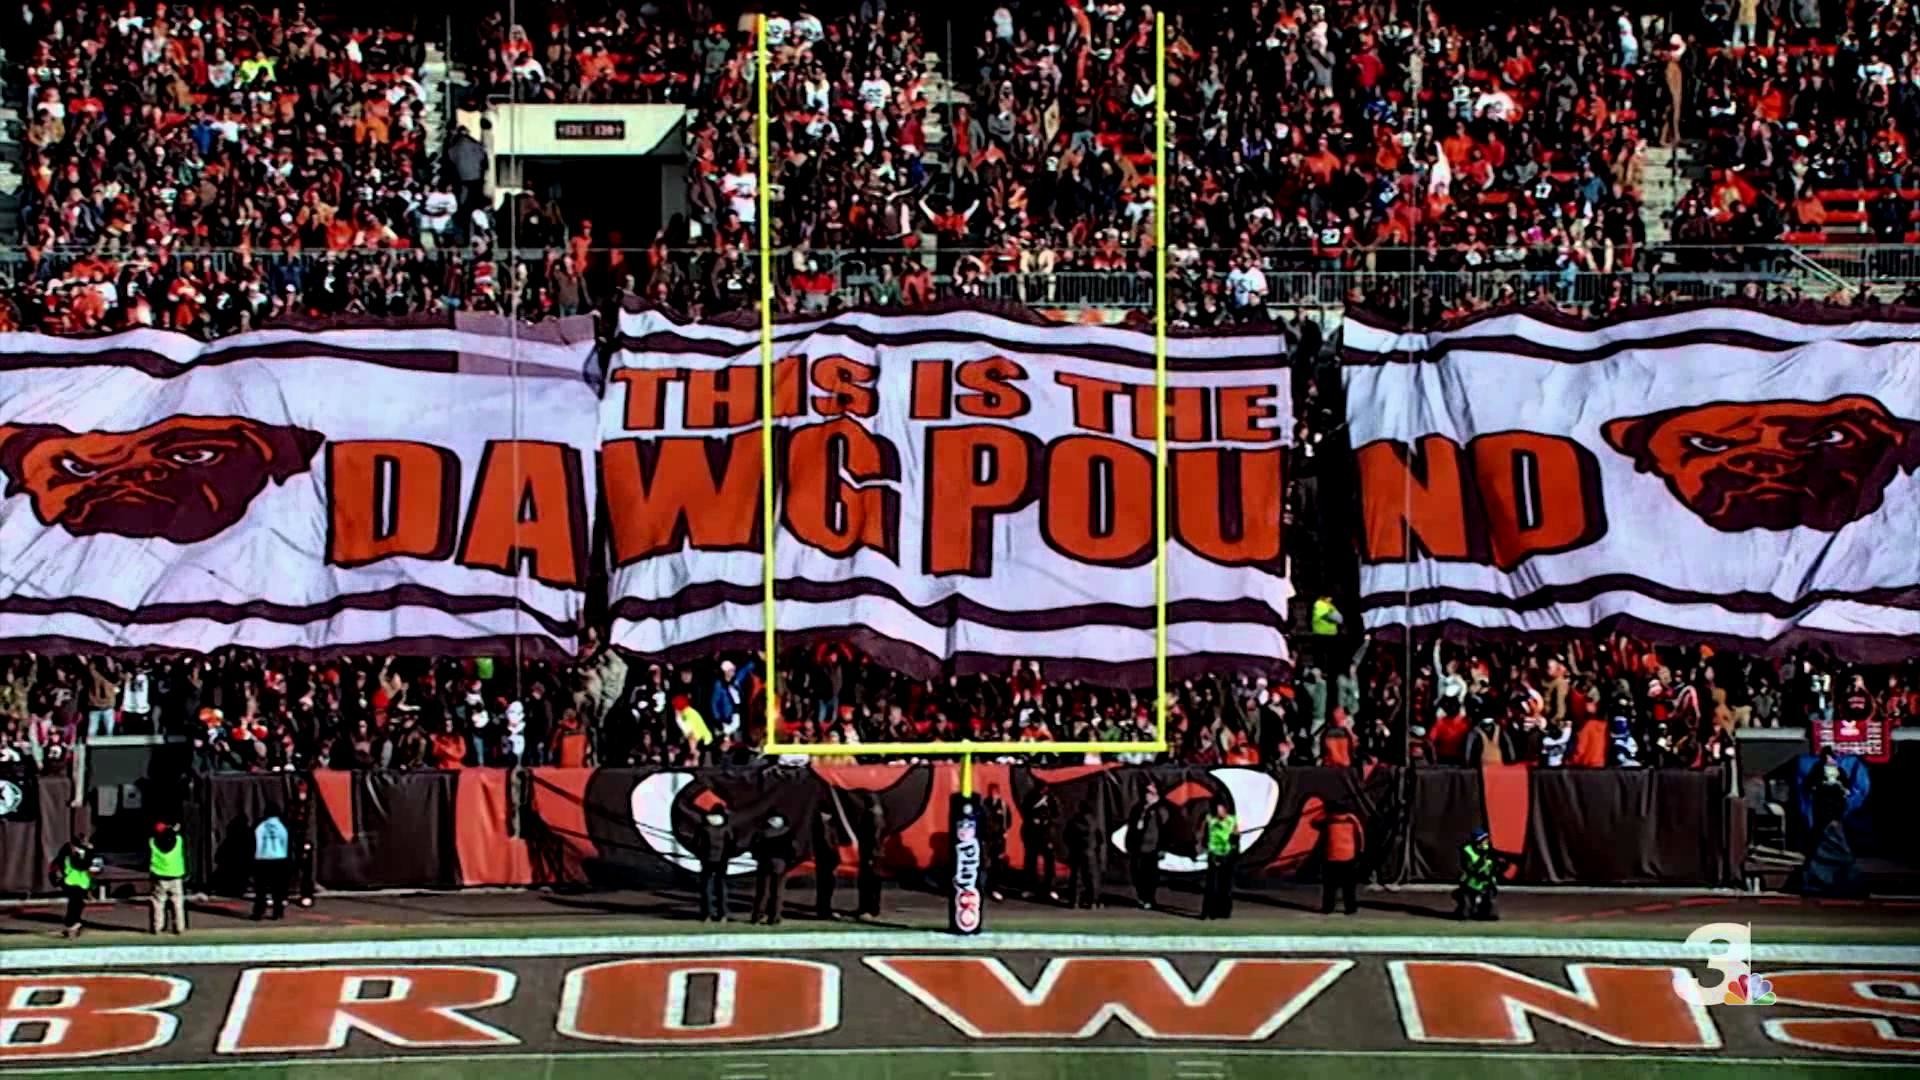 1920x1080 wallpaper.wiki-Photos-Cleveland-Browns-Wallpapers-HD-PIC-